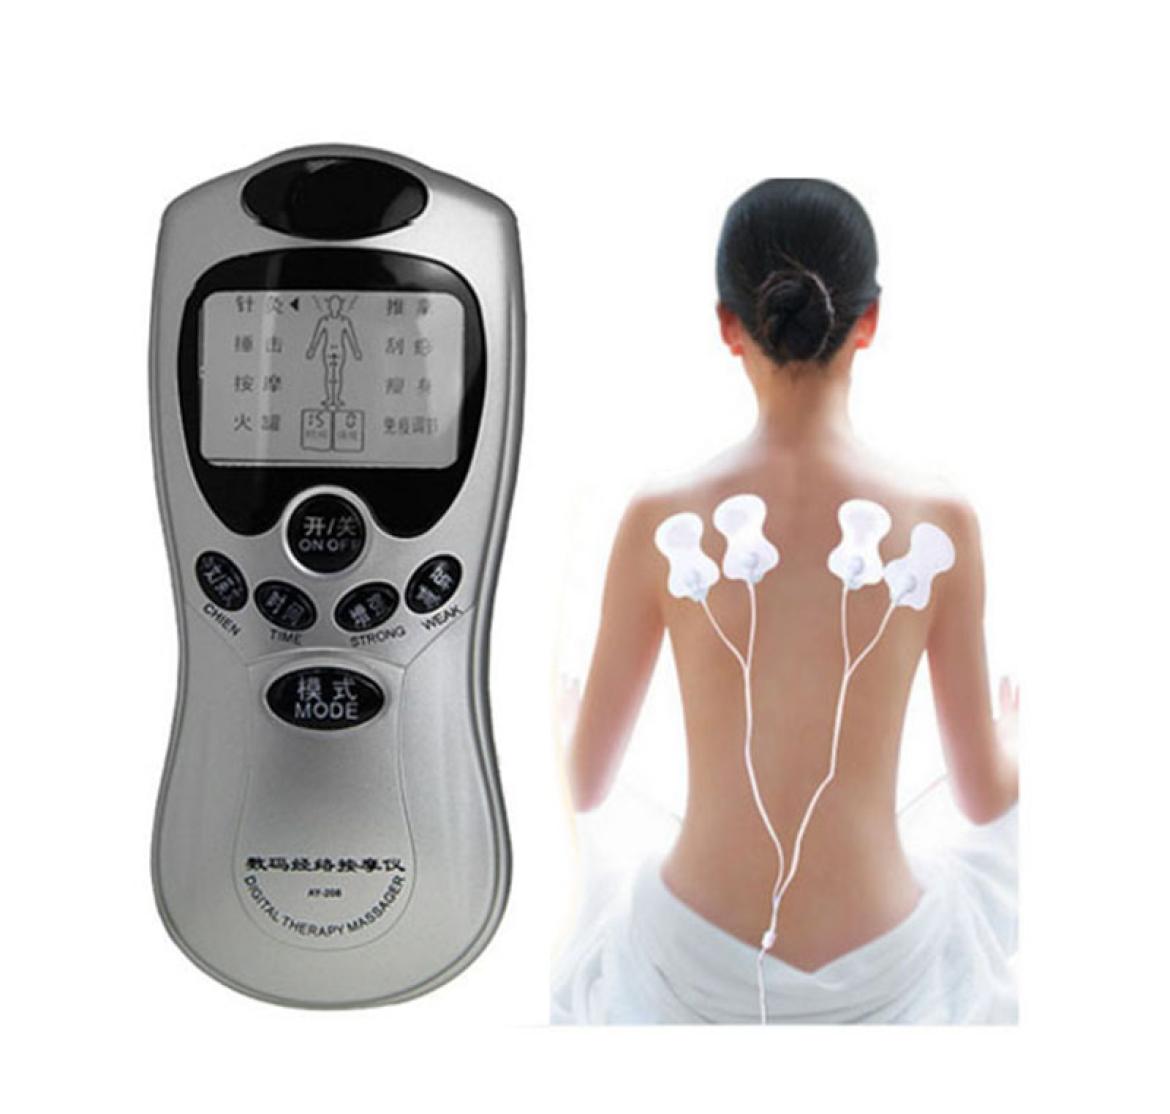 

Whole Electric Tens Acupuncture Full Boby Massage Relax Pain Relief Digital Therapy machine 6pcs Electrode Pads9253222